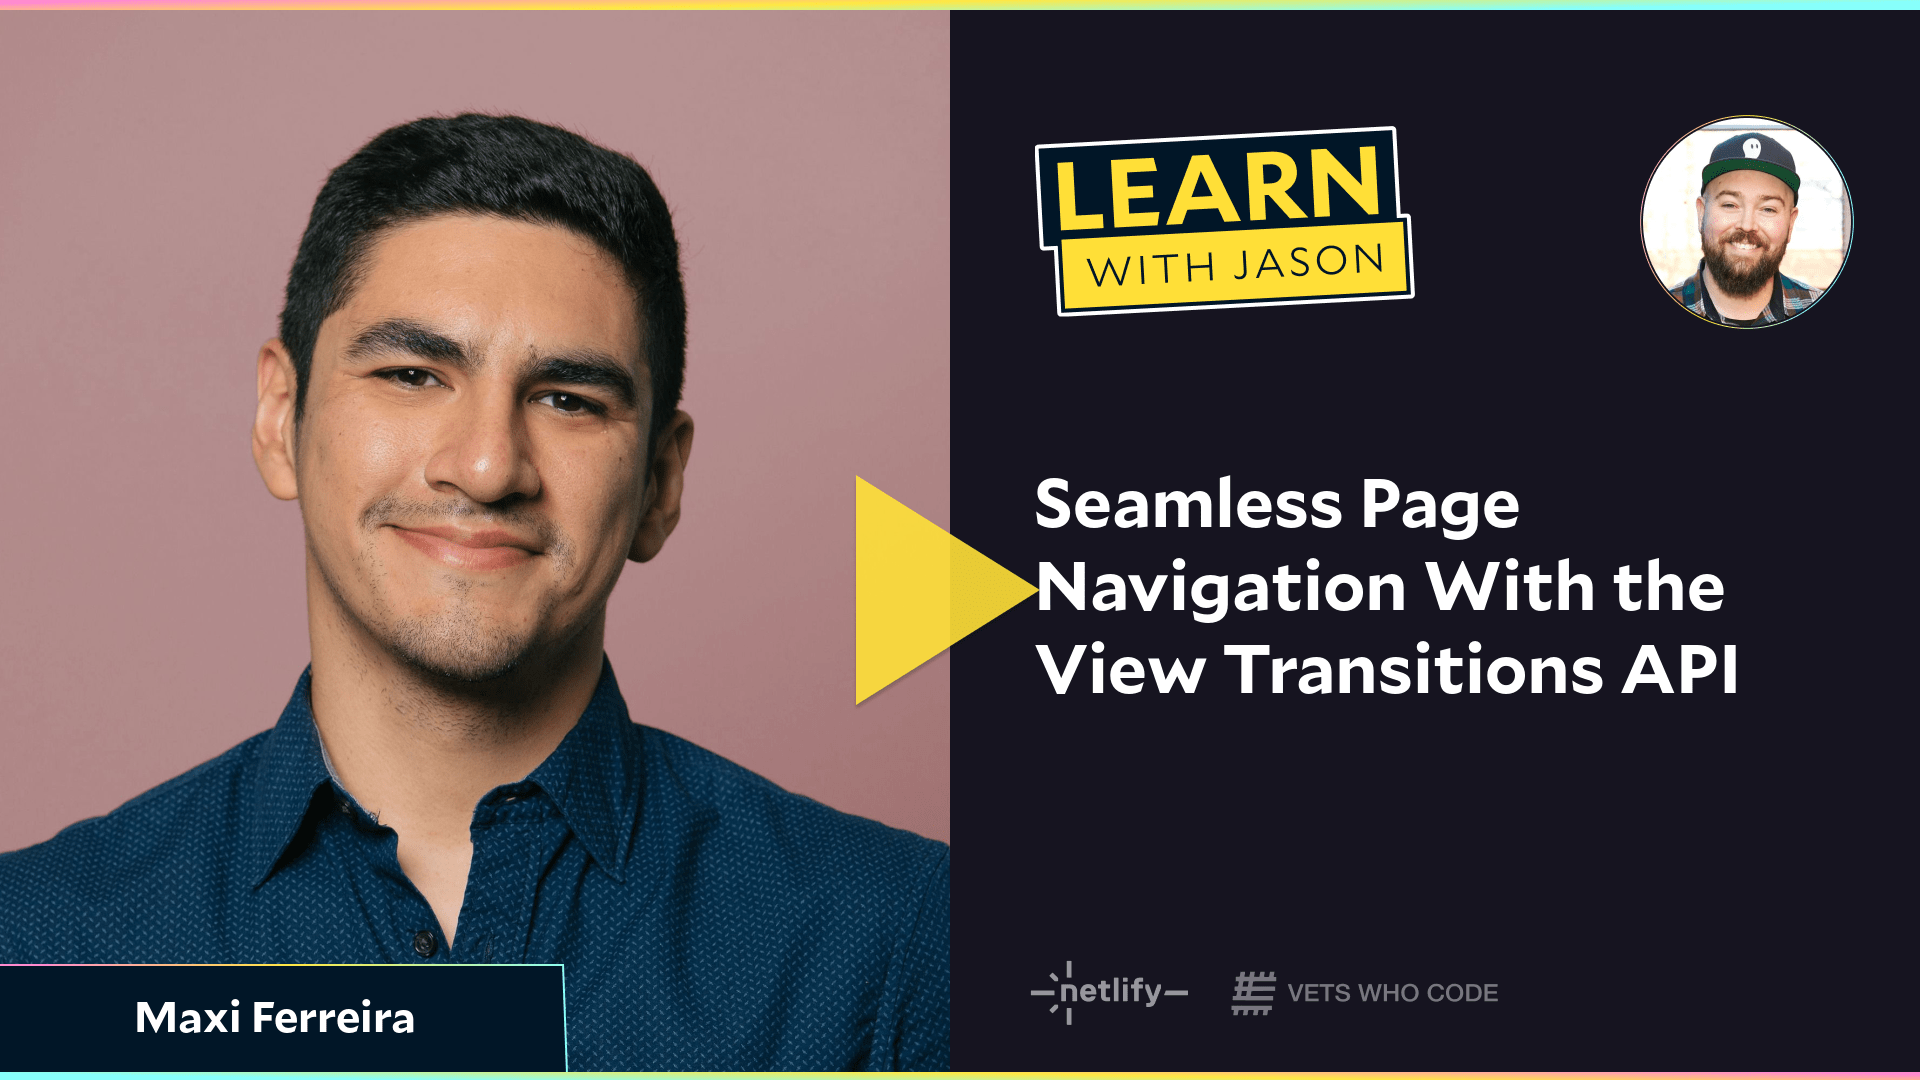 Seamless Page Navigation With the View Transitions API (with Maxi Ferreira)